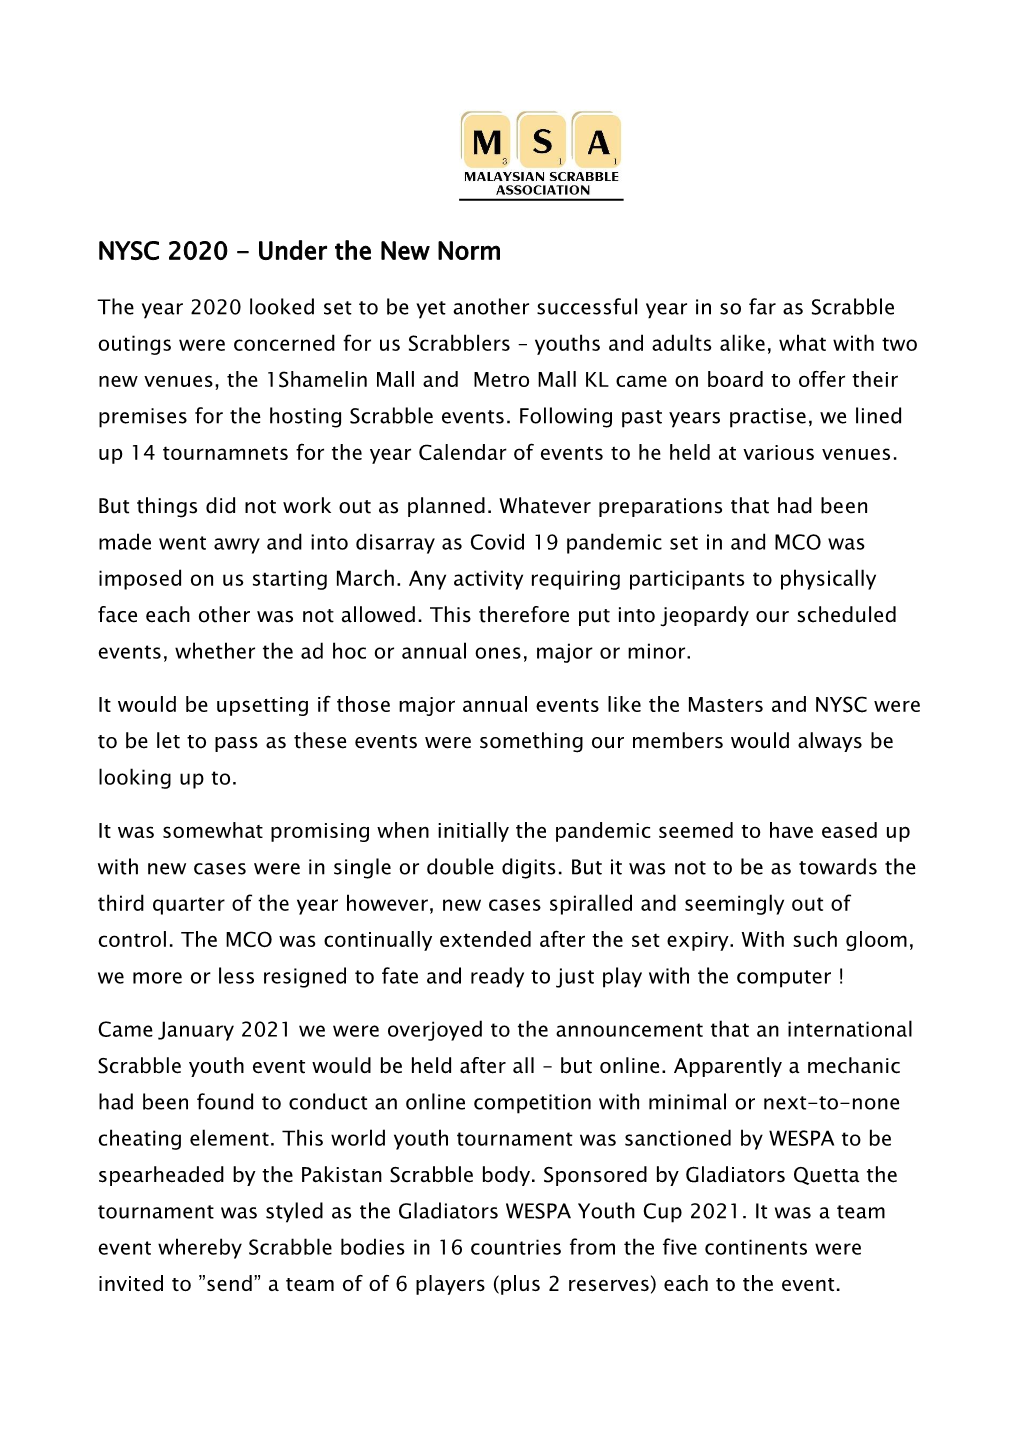 NYSC 2020 - Under the New Norm